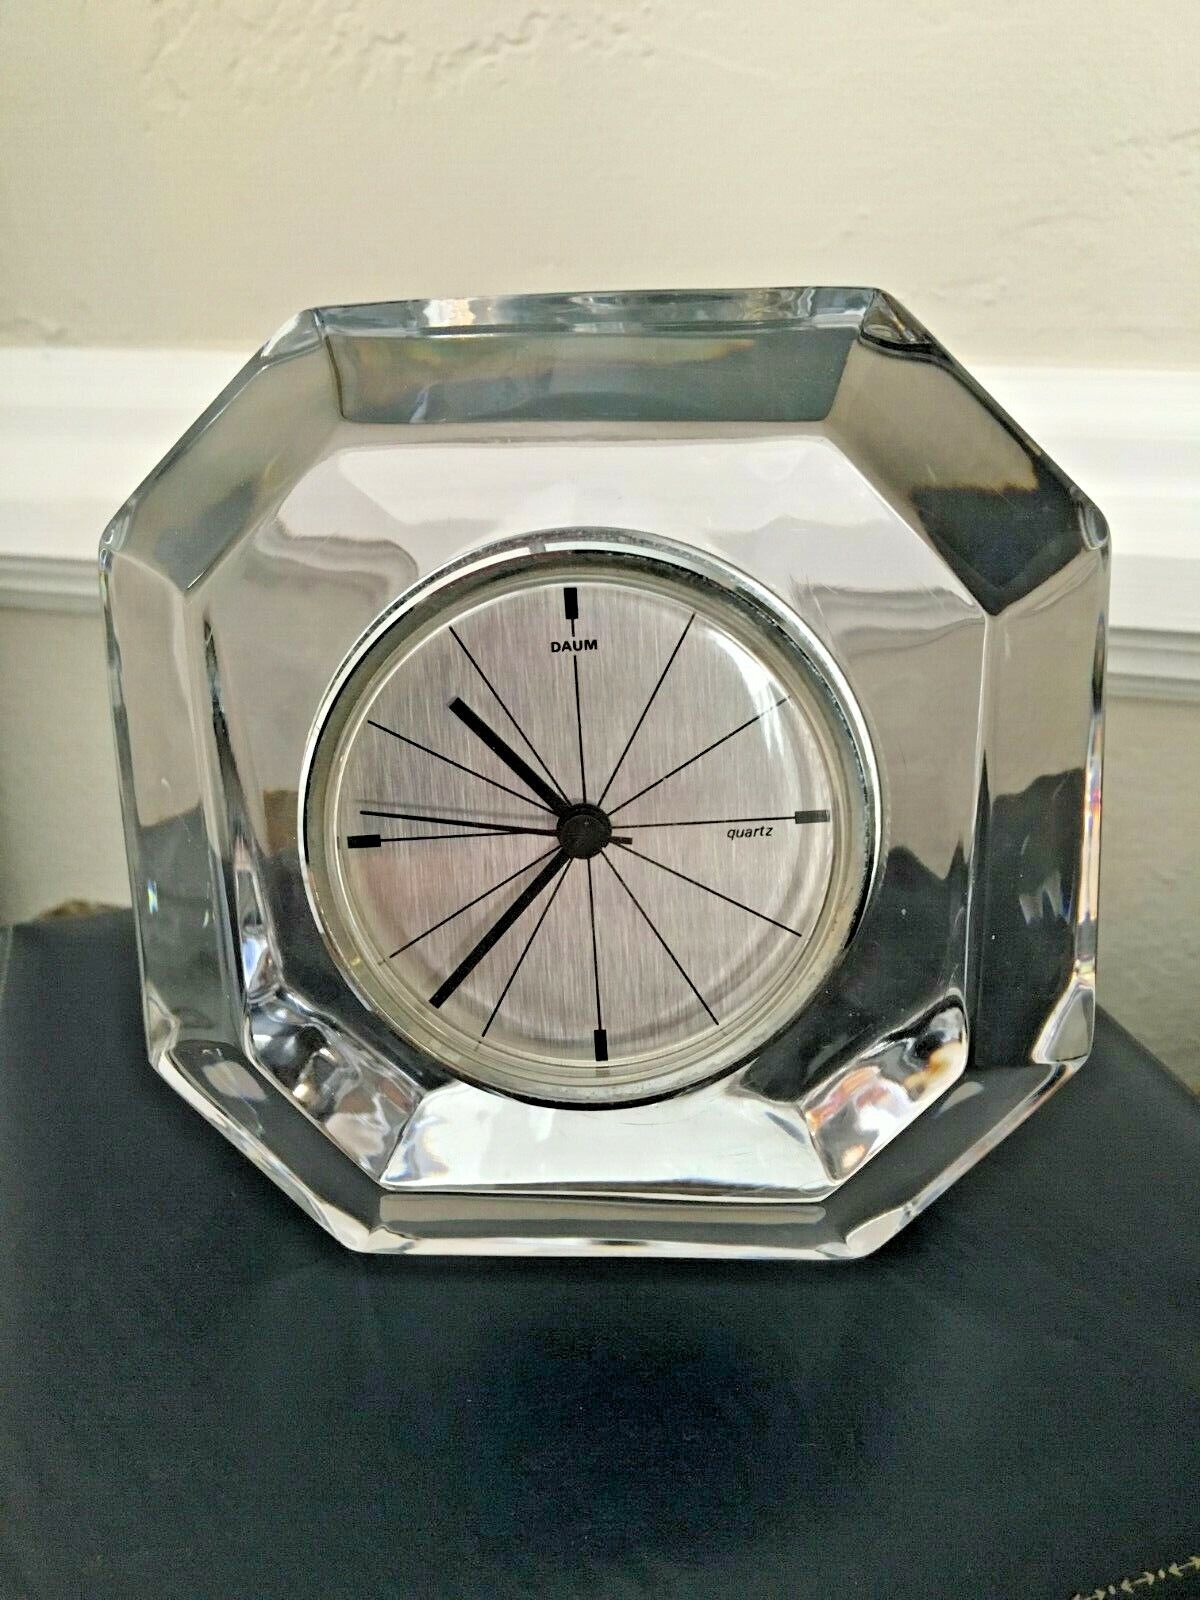 VINTAGE DAUM CRYSTAL OCTAGON CLOCK IN FITTED BOX MADE IN FRANCE -SIGNED